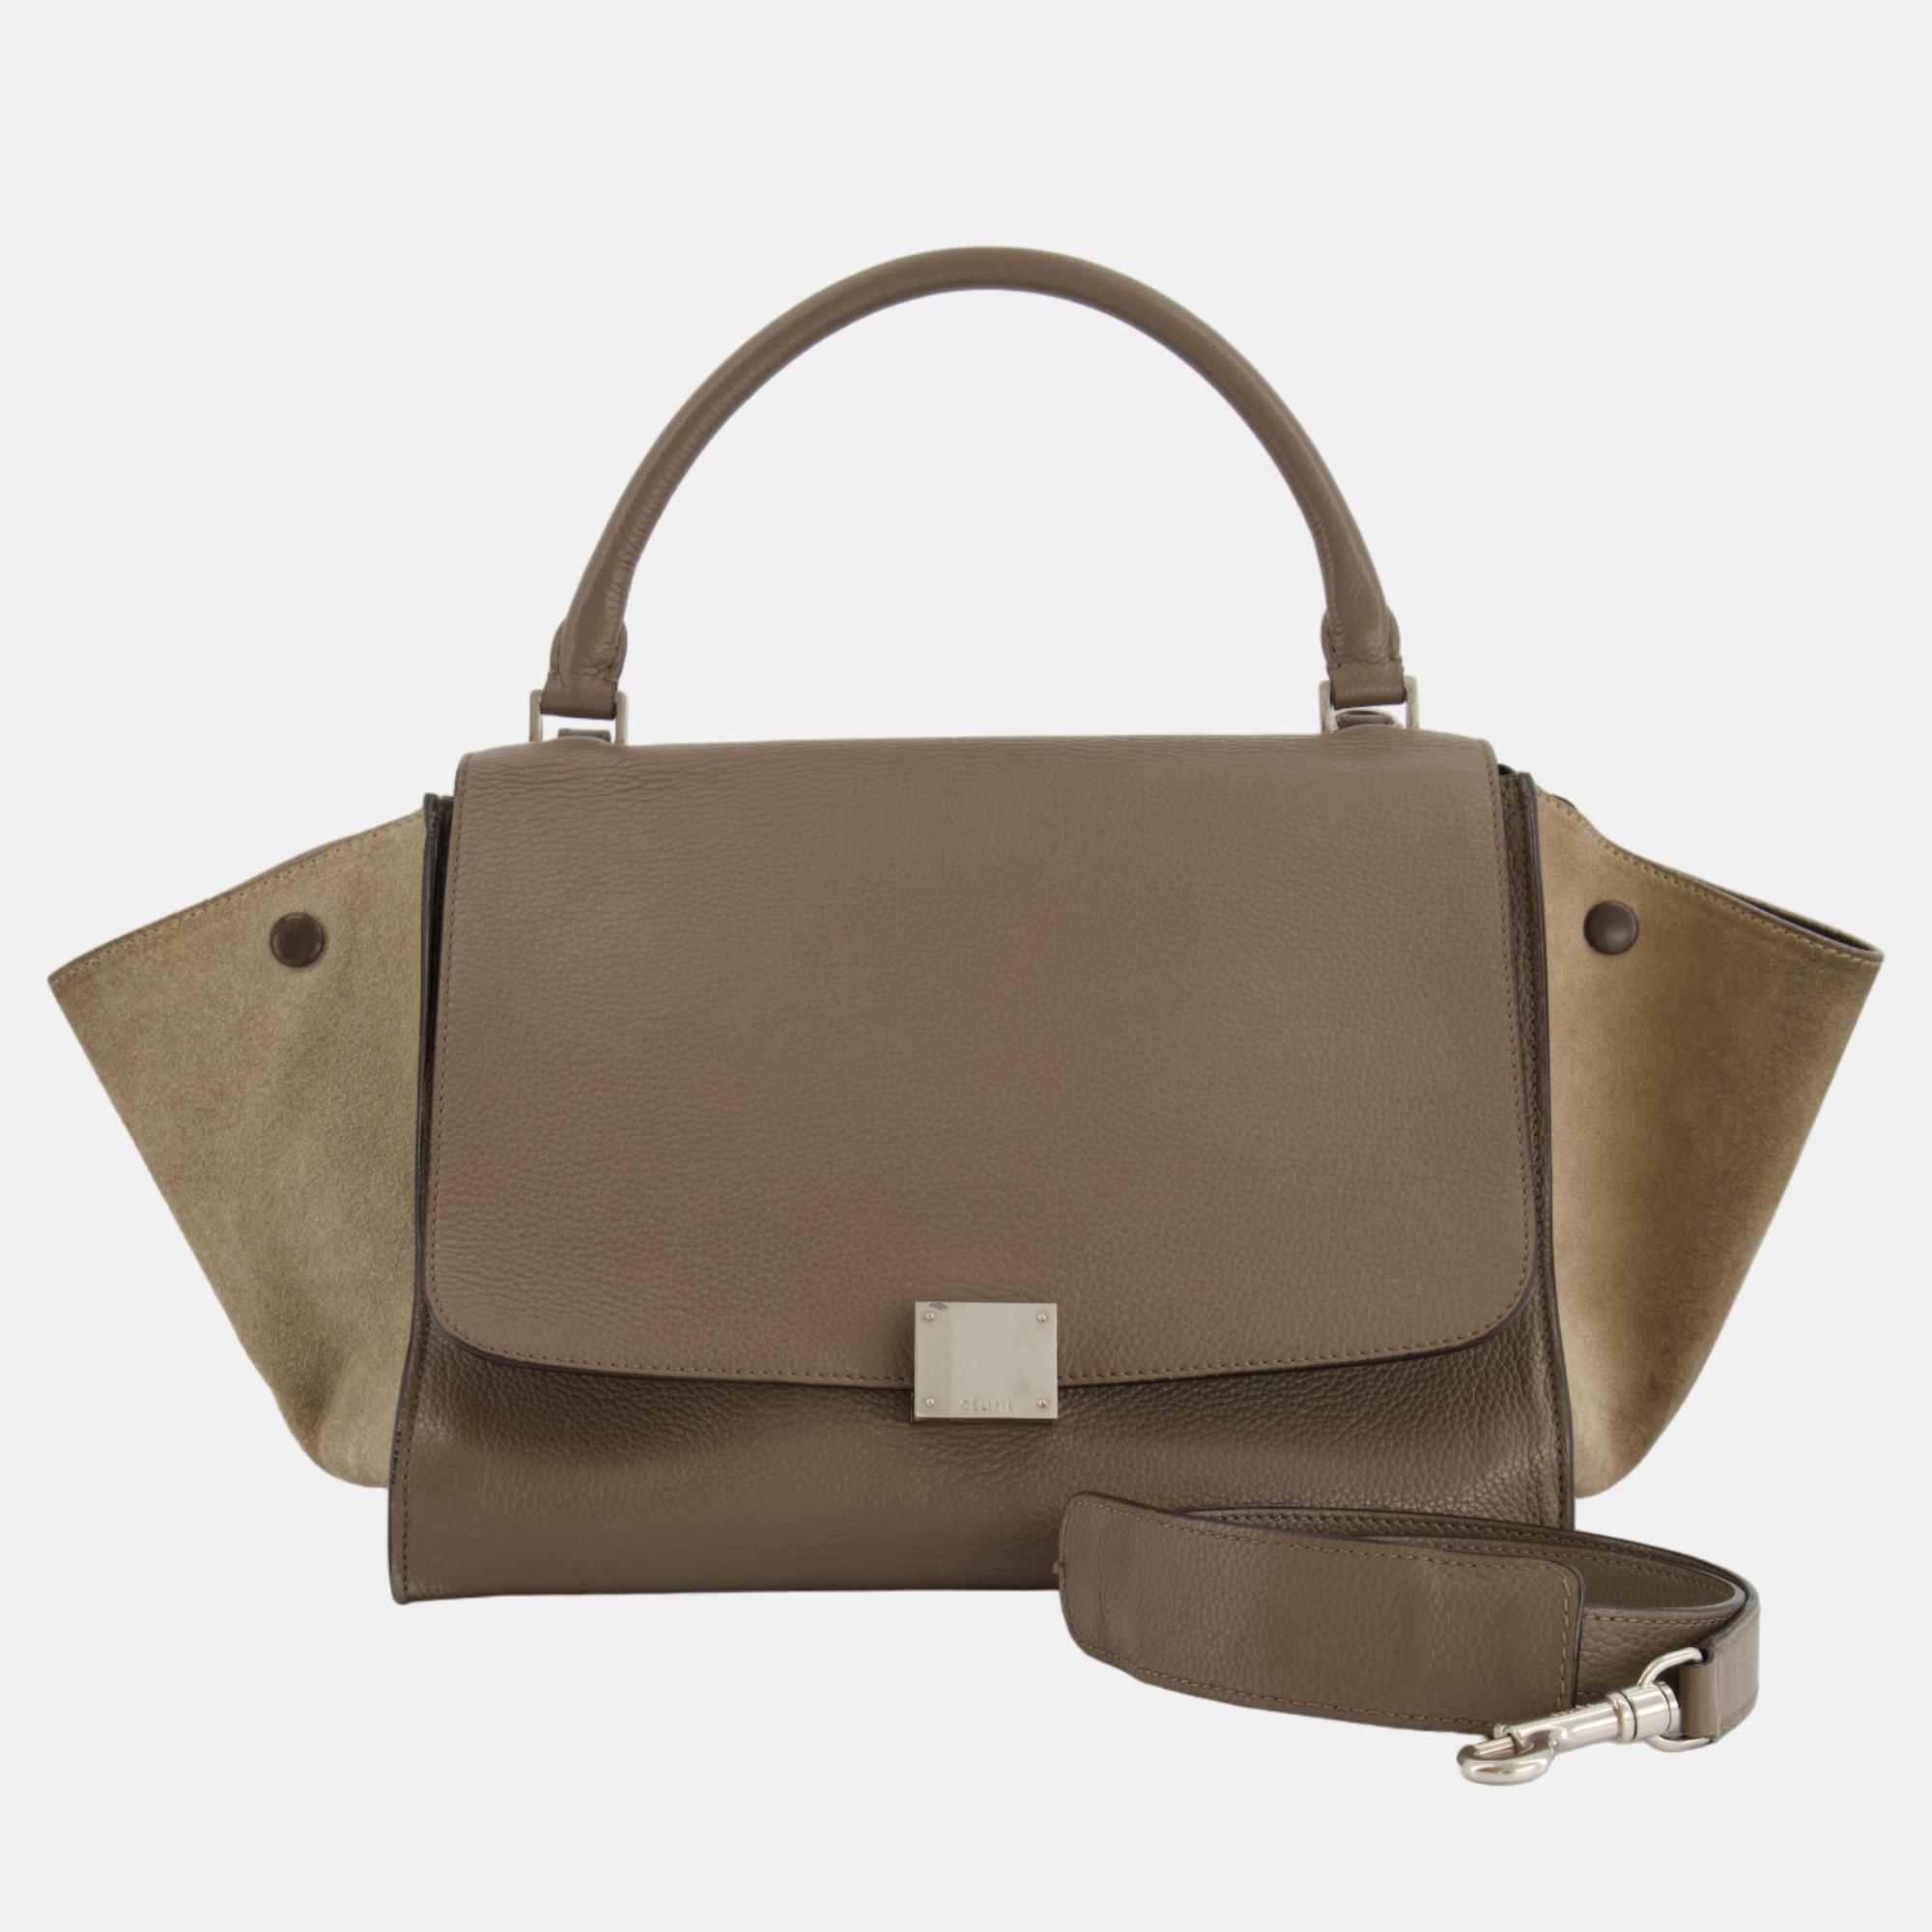 Celine Khaki Leather And Suede Trapeze Handbag With Silver Hardware